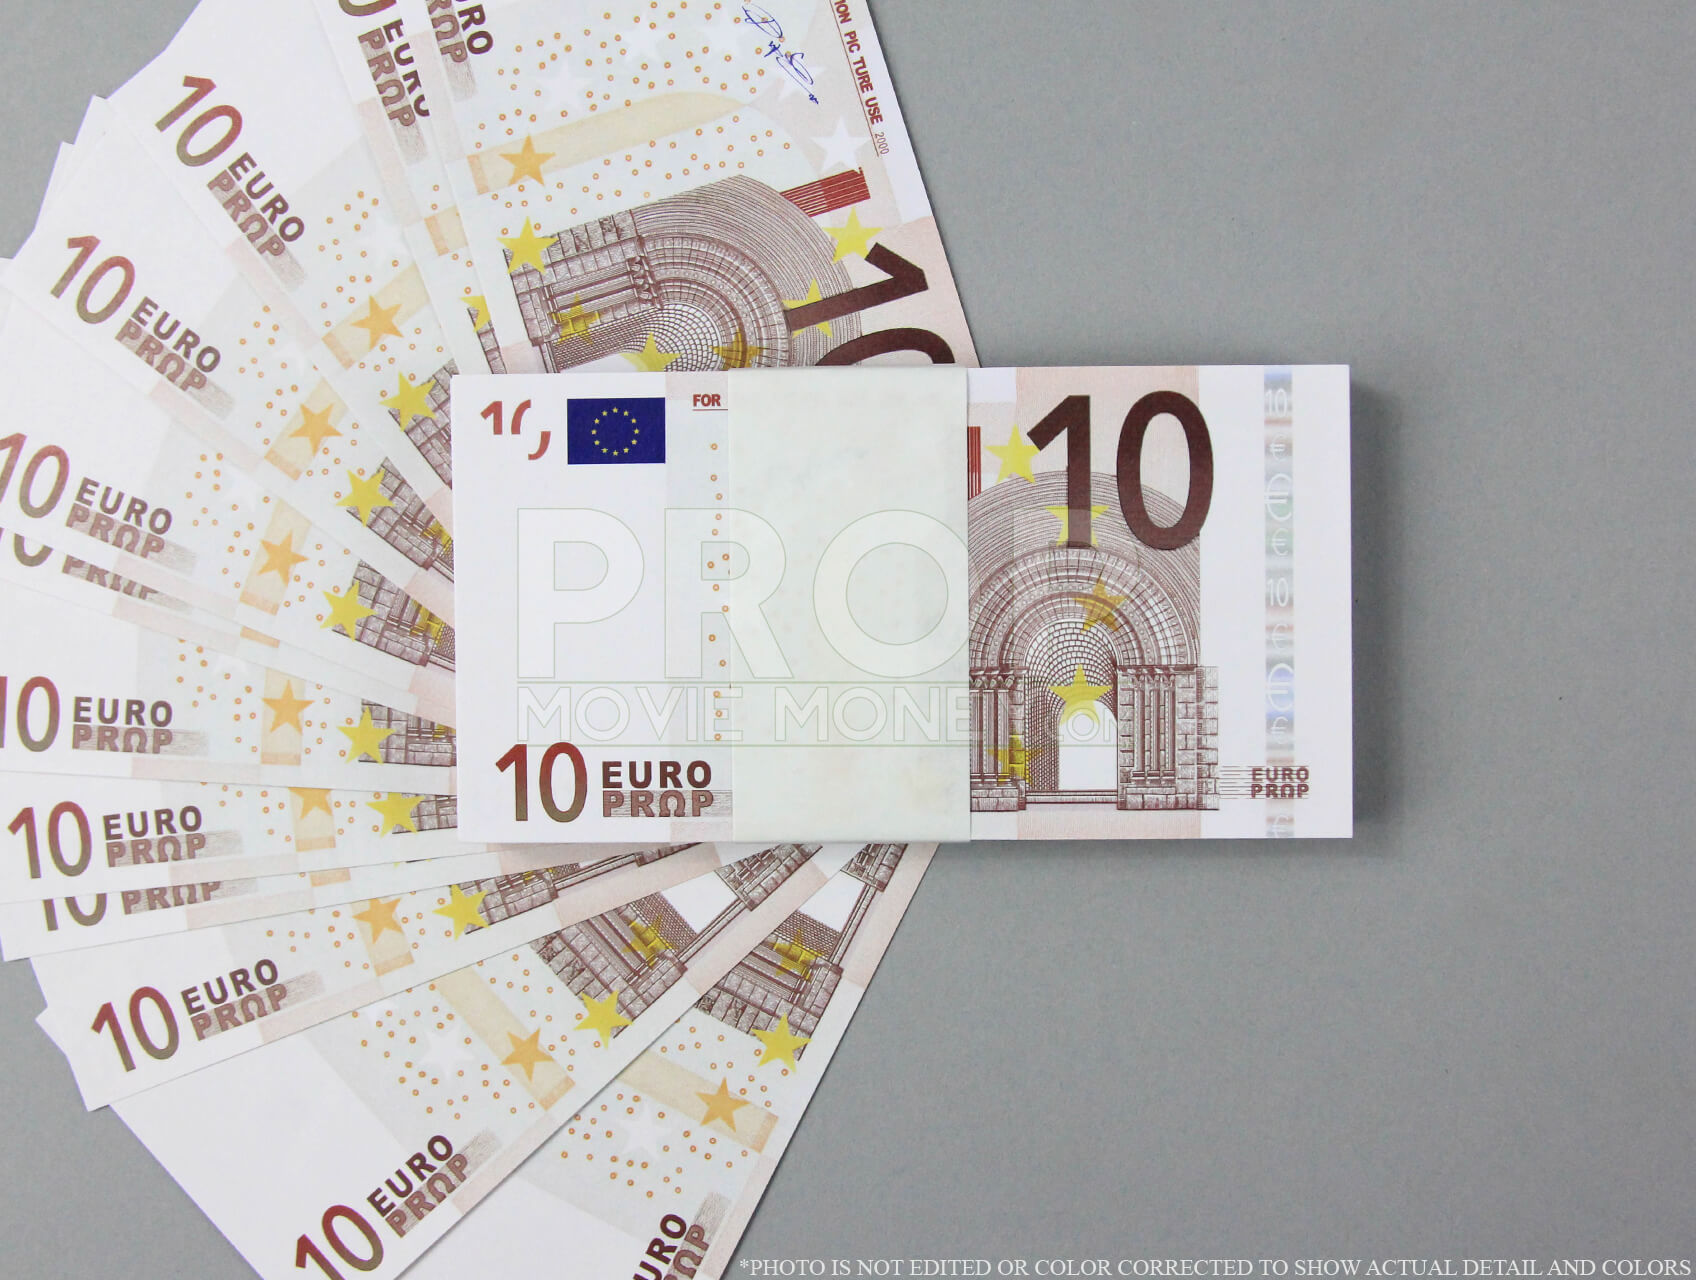 Euro Prop Money - The Official Prop Money of the Film Industry